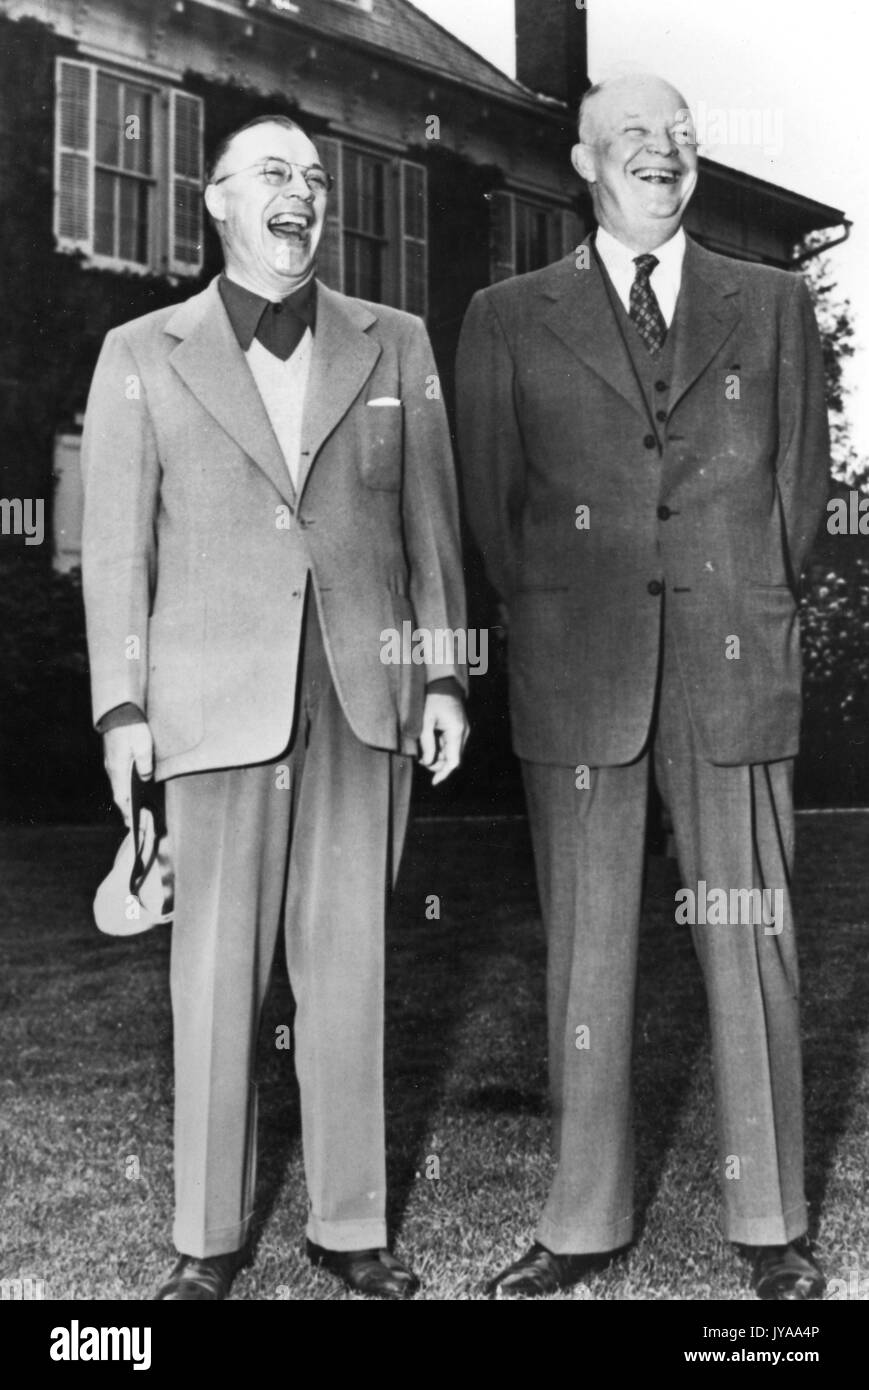 Milton Stover Eisenhower (left), president of Johns Hopkins University, standing and laughing with his brother Dwight D Eisenhower (right), President of the United States, 1965. Stock Photo